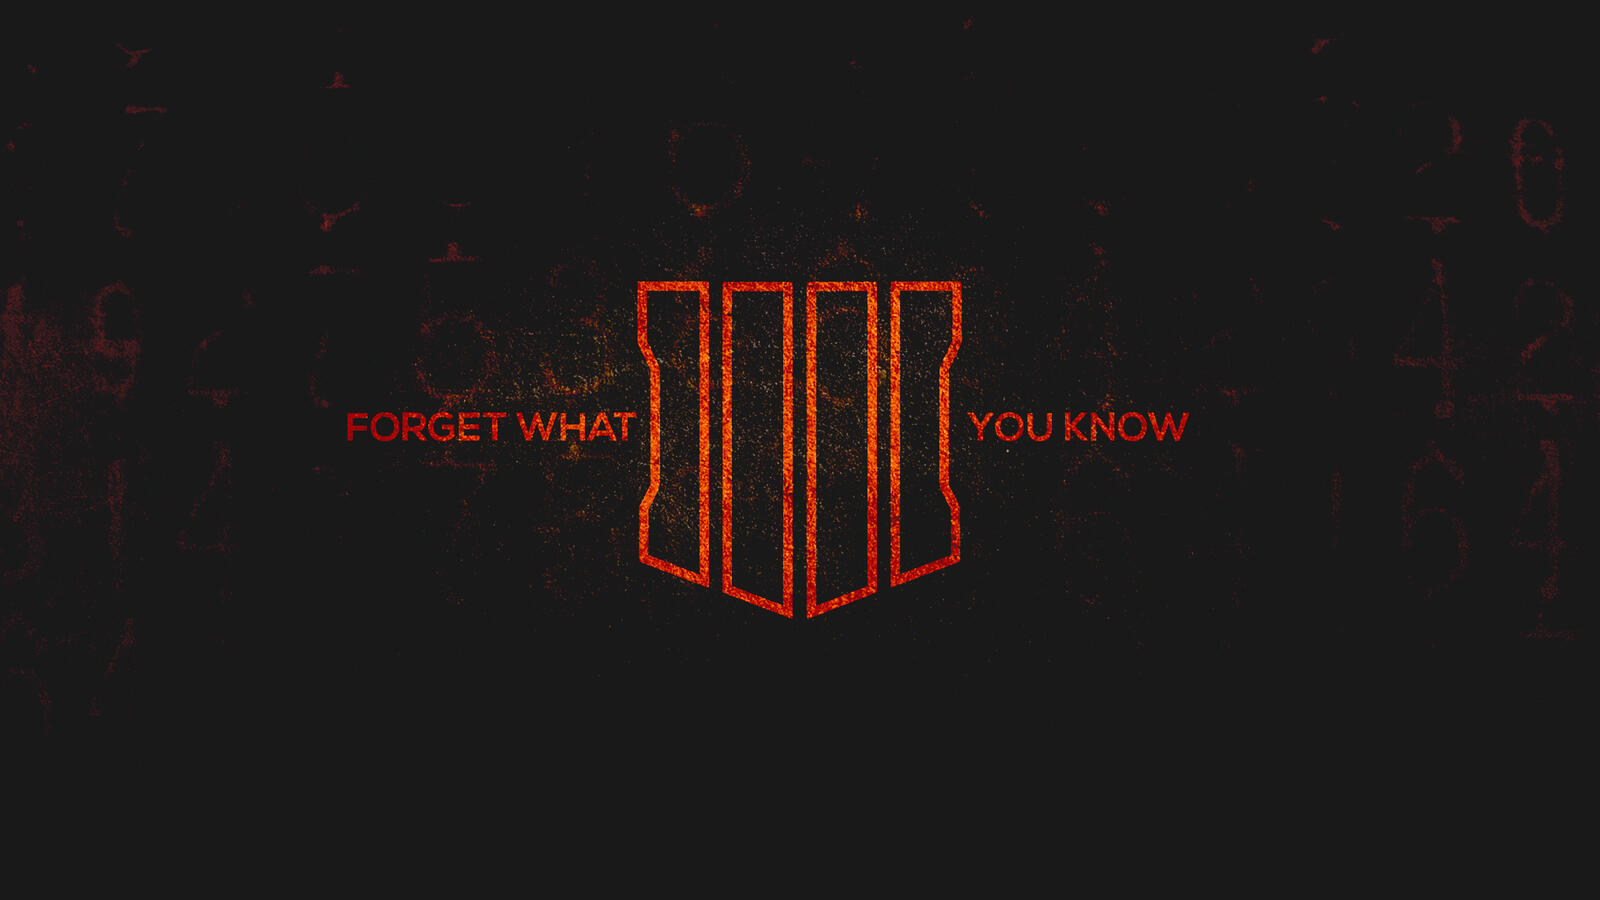 Wallpapers call of duty psb games call of duty black ops 4 on the desktop